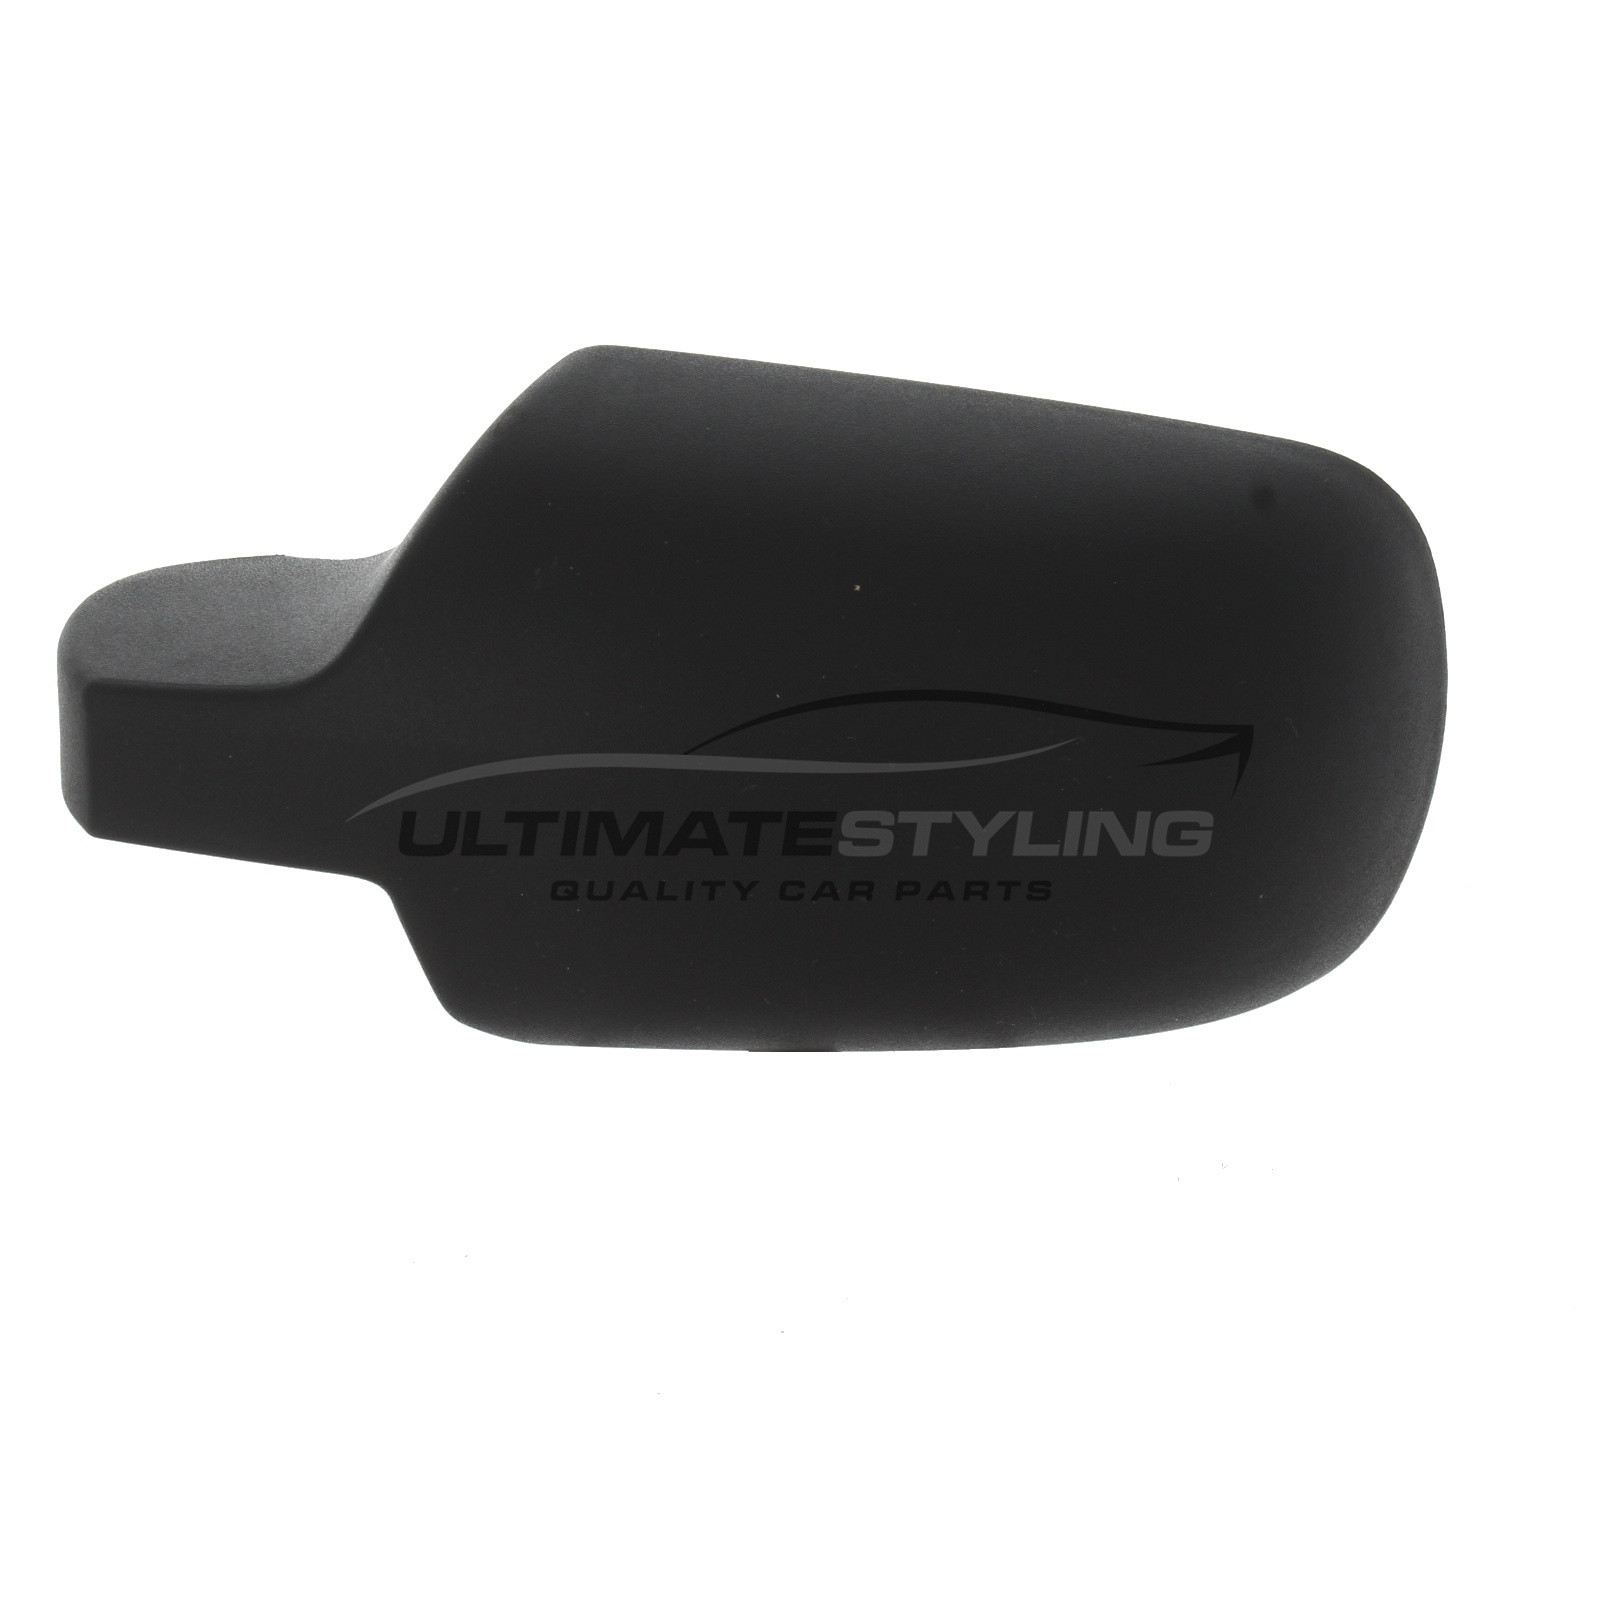 Ford Fiesta 2002-2009, Ford Fusion 2002-2012 Wing Mirror Cover Cap Casing Black (Textured) Passenger Side (LH)